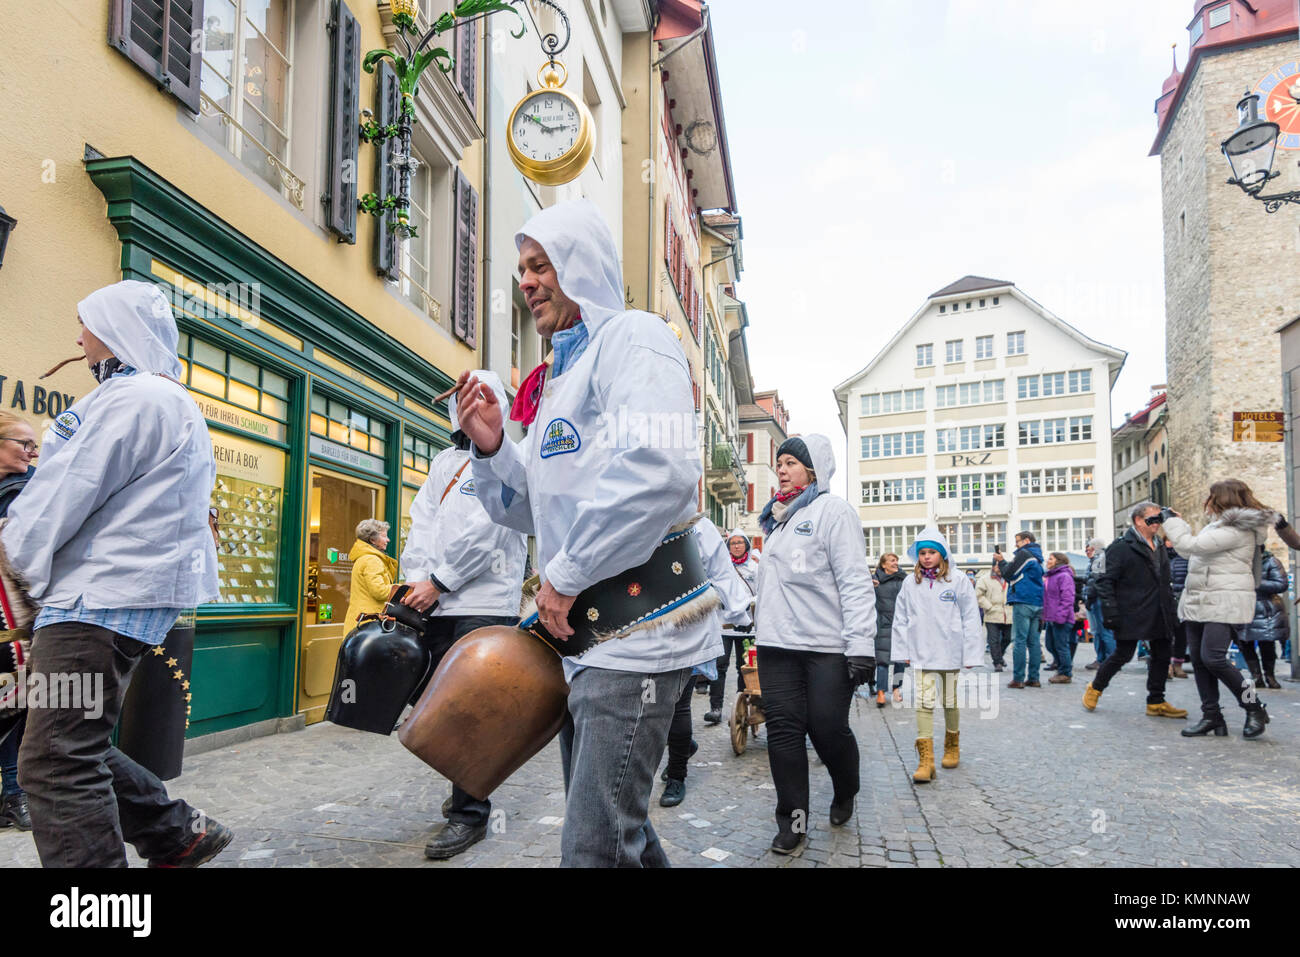 Lucerne, Switzerland - 2 Dec 2017: A group of traditional 'Trychler' men are striking their huge cowbells during the traditional Christmas parade. Stock Photo